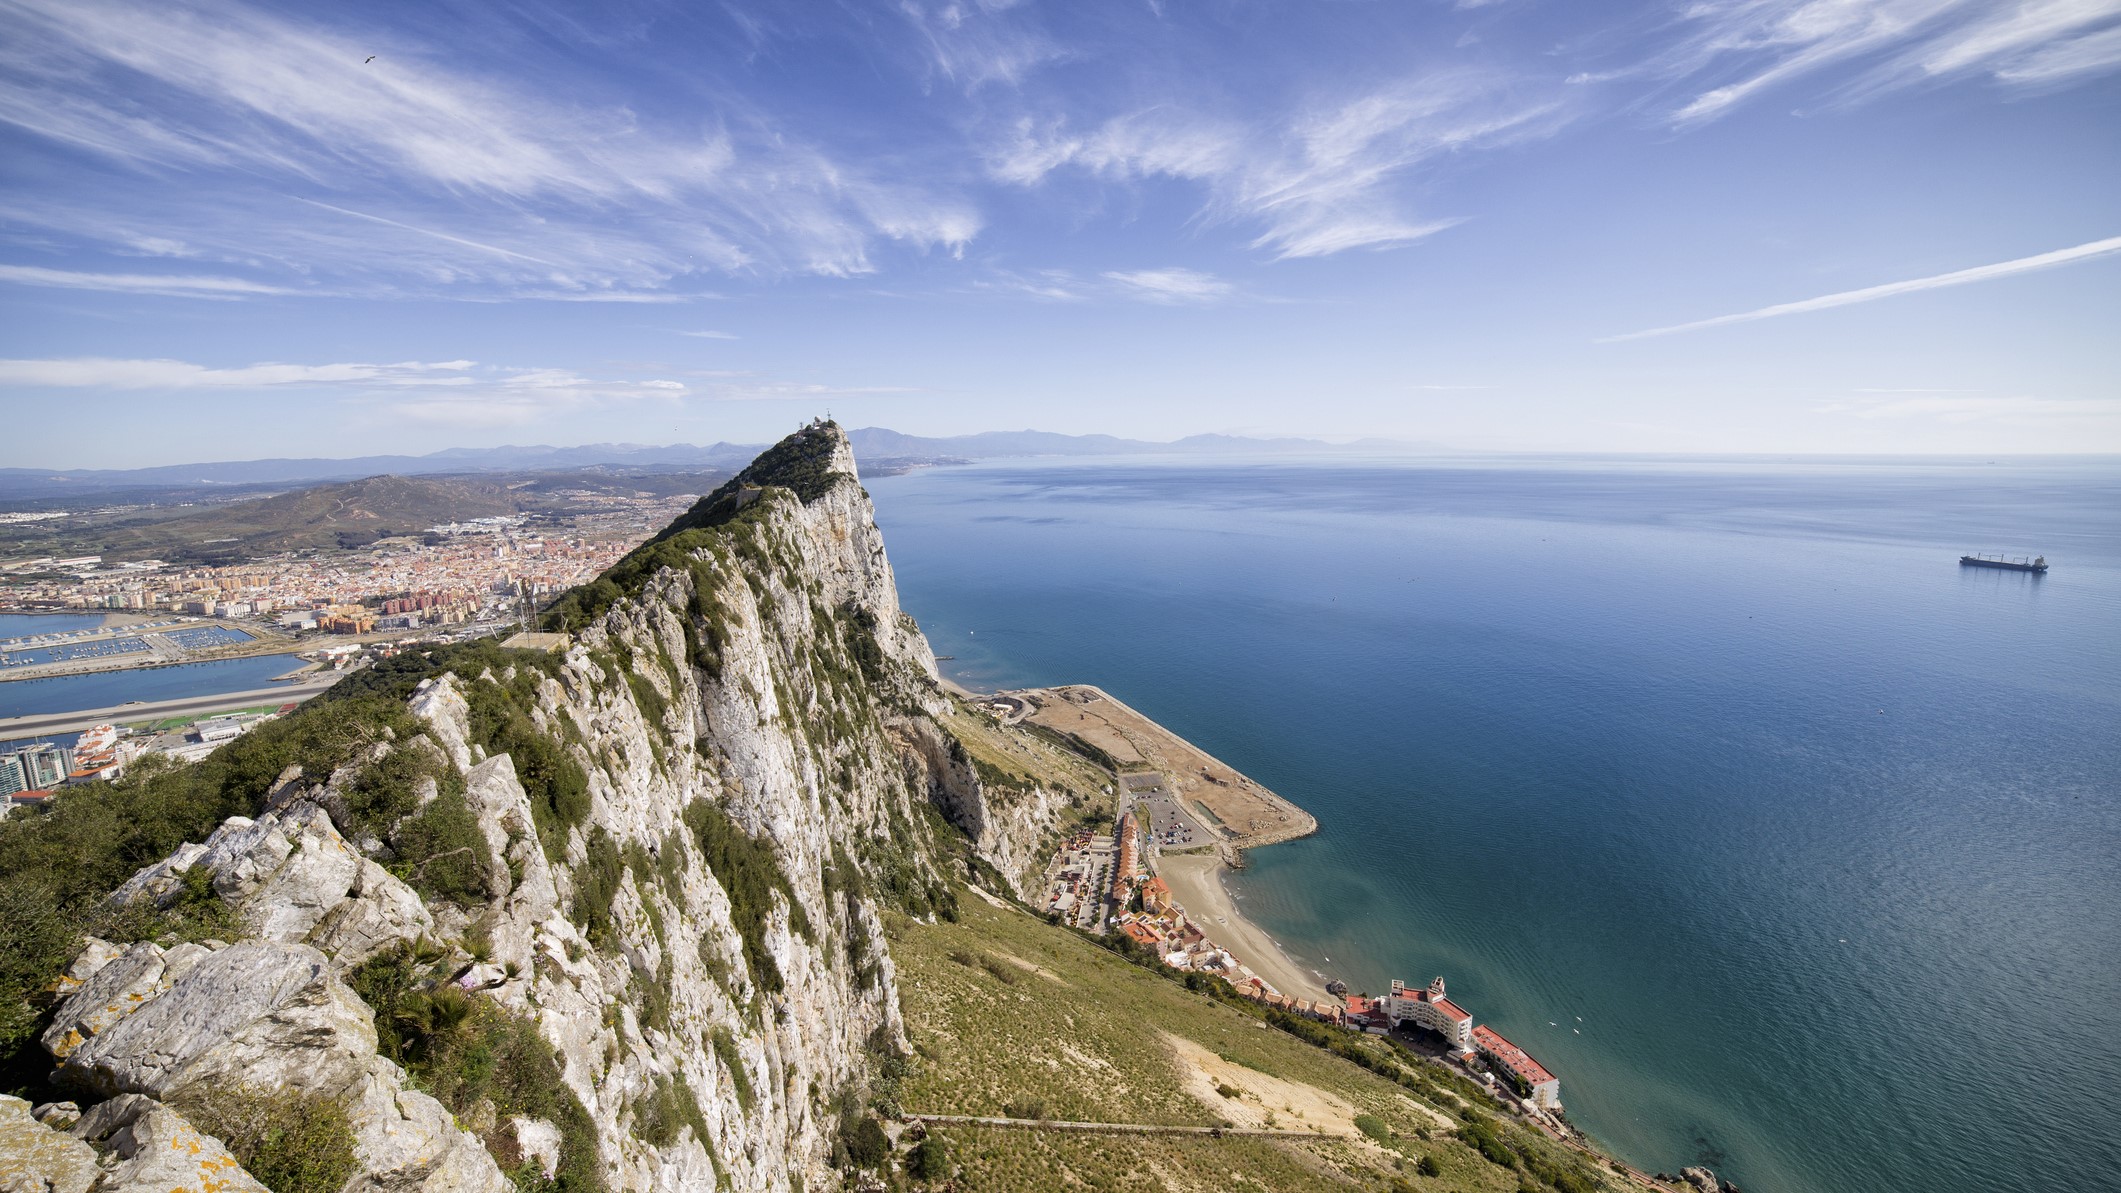 aerial view of Gibraltar rock in the foreground and a vast body of water in the background with a partly cloudy sky above.